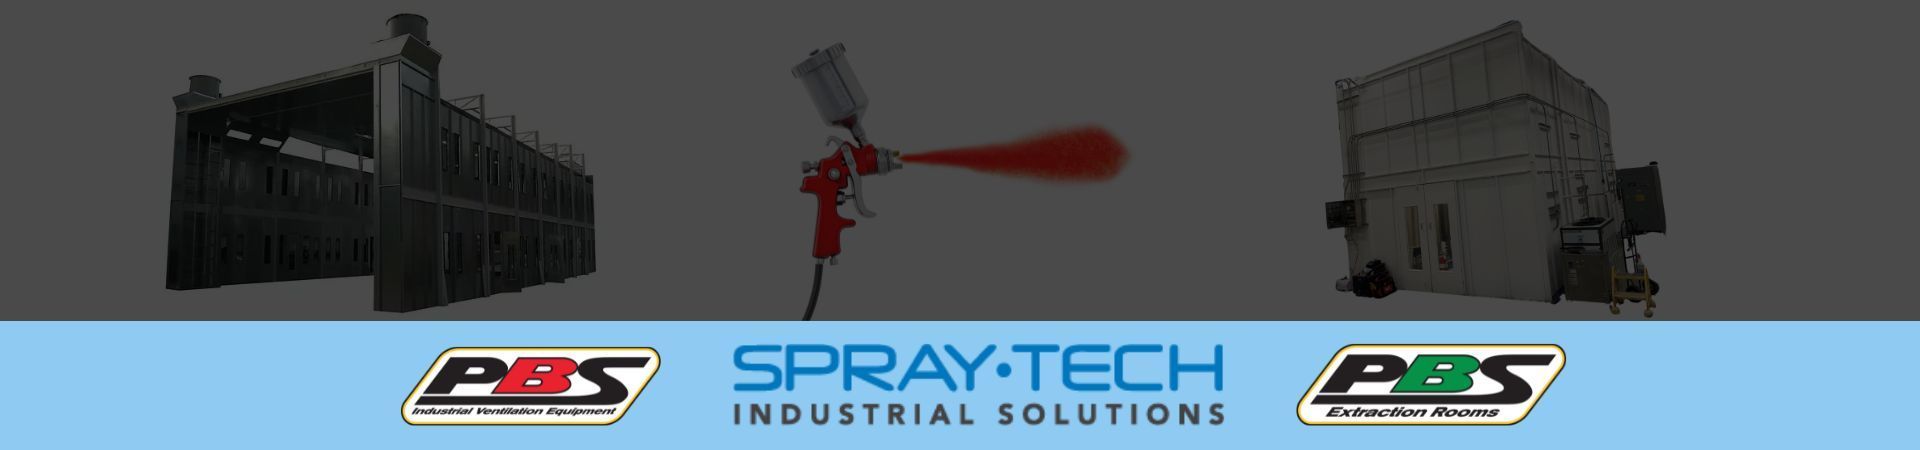 Spray Tech Merges with PBS Industries